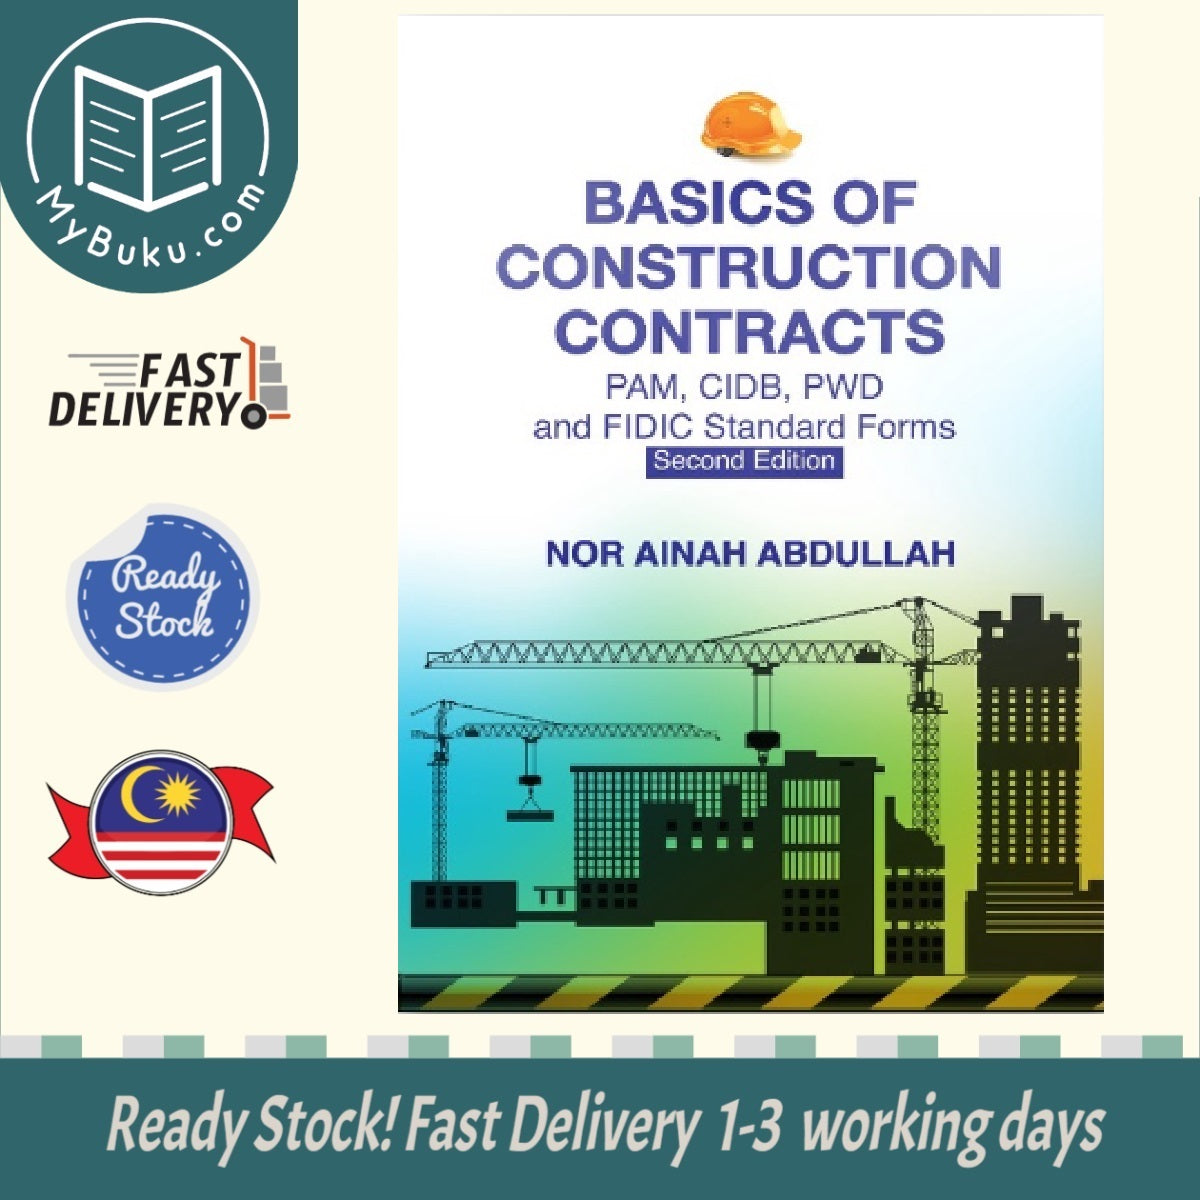 Basics of Construction Contracts (PAM, CIDB, PWD and FIDIC) 2nd Edition - Nor Ainah Abdullah - 9789673638000 - Penerbit Uitm